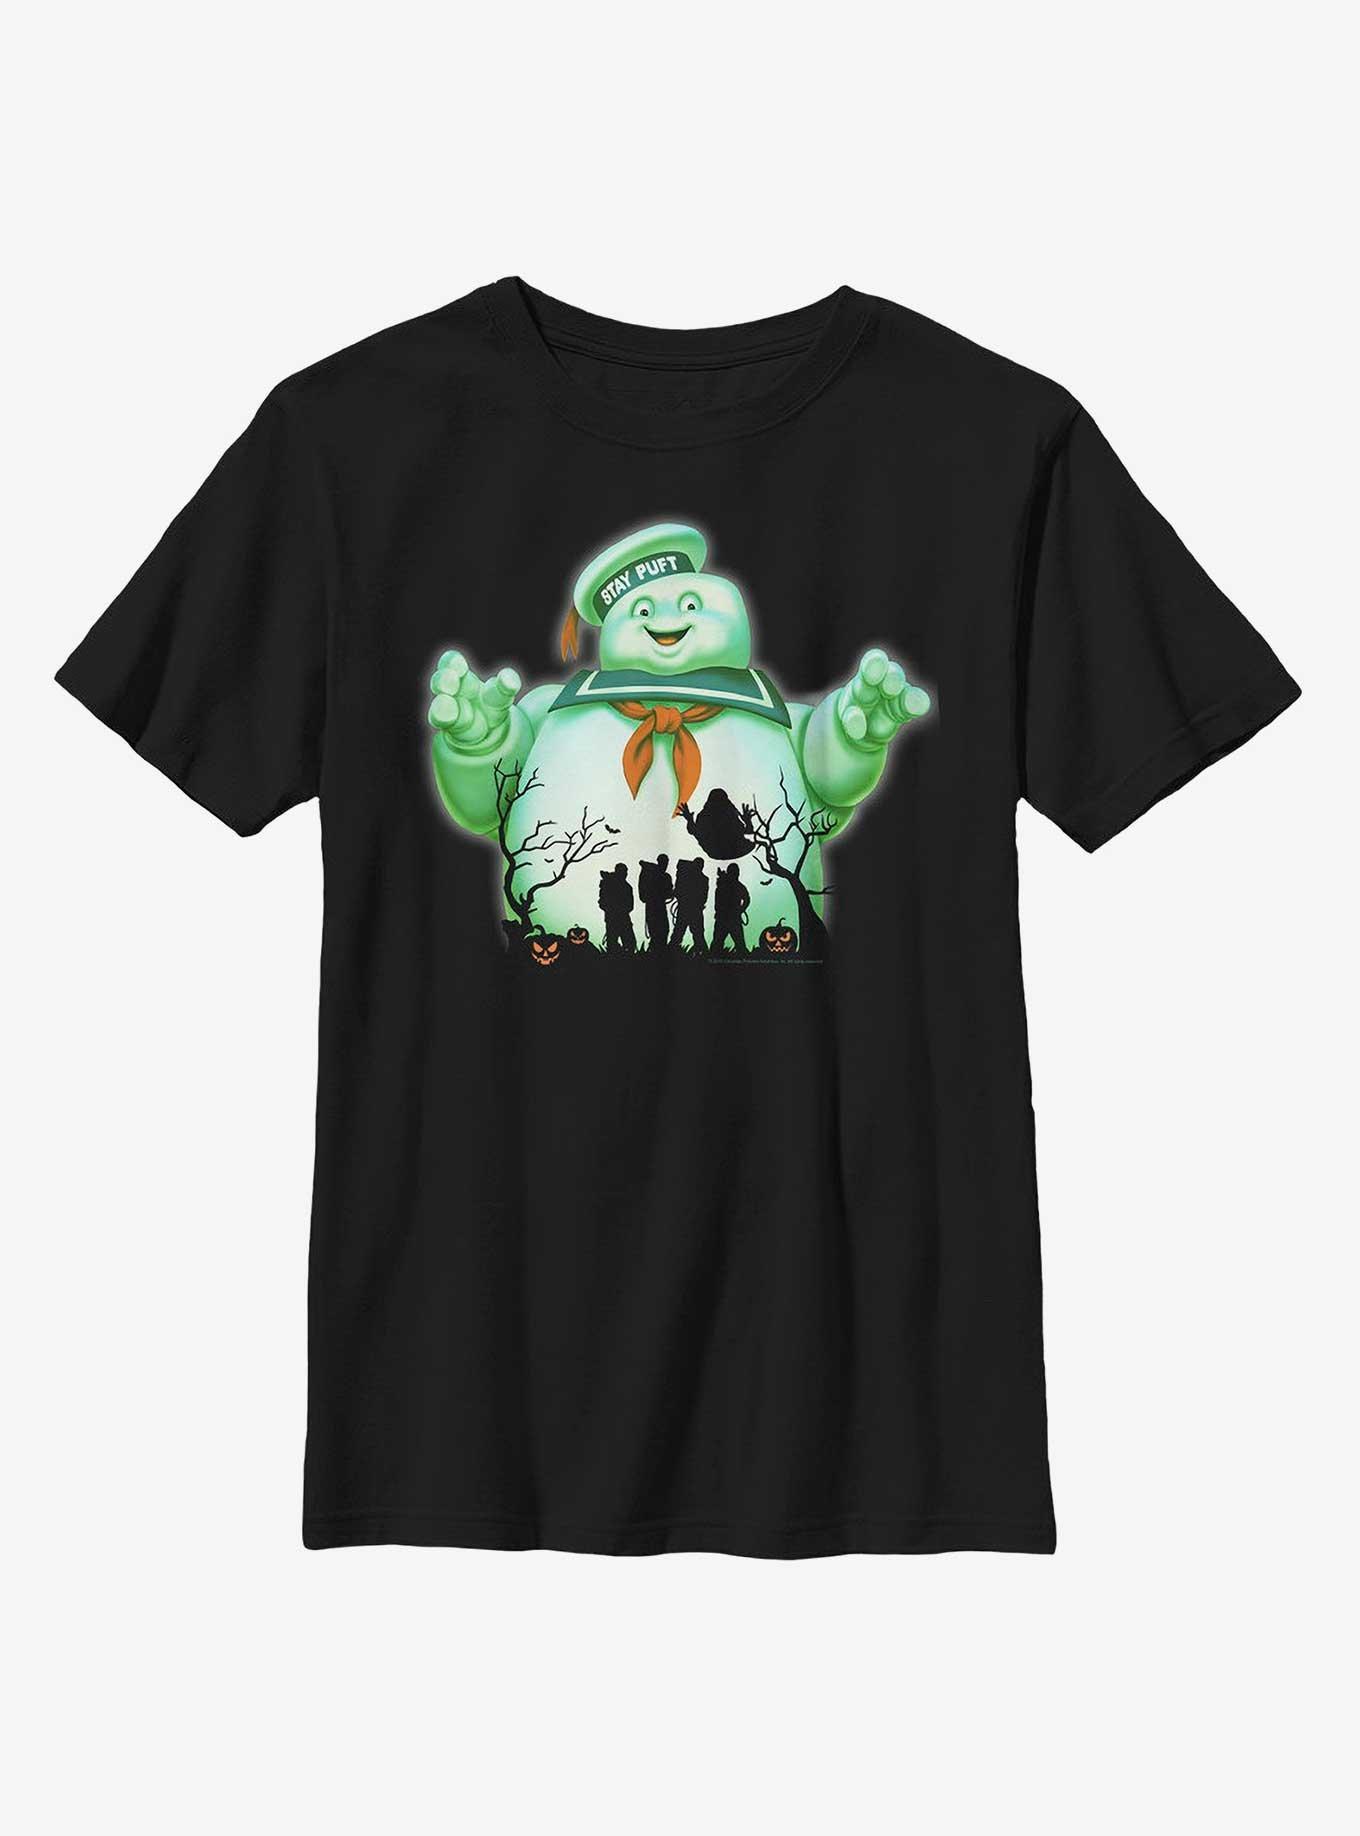 Ghostbusters Big Puft Halloween Youth T-Shirt, BLACK, hi-res